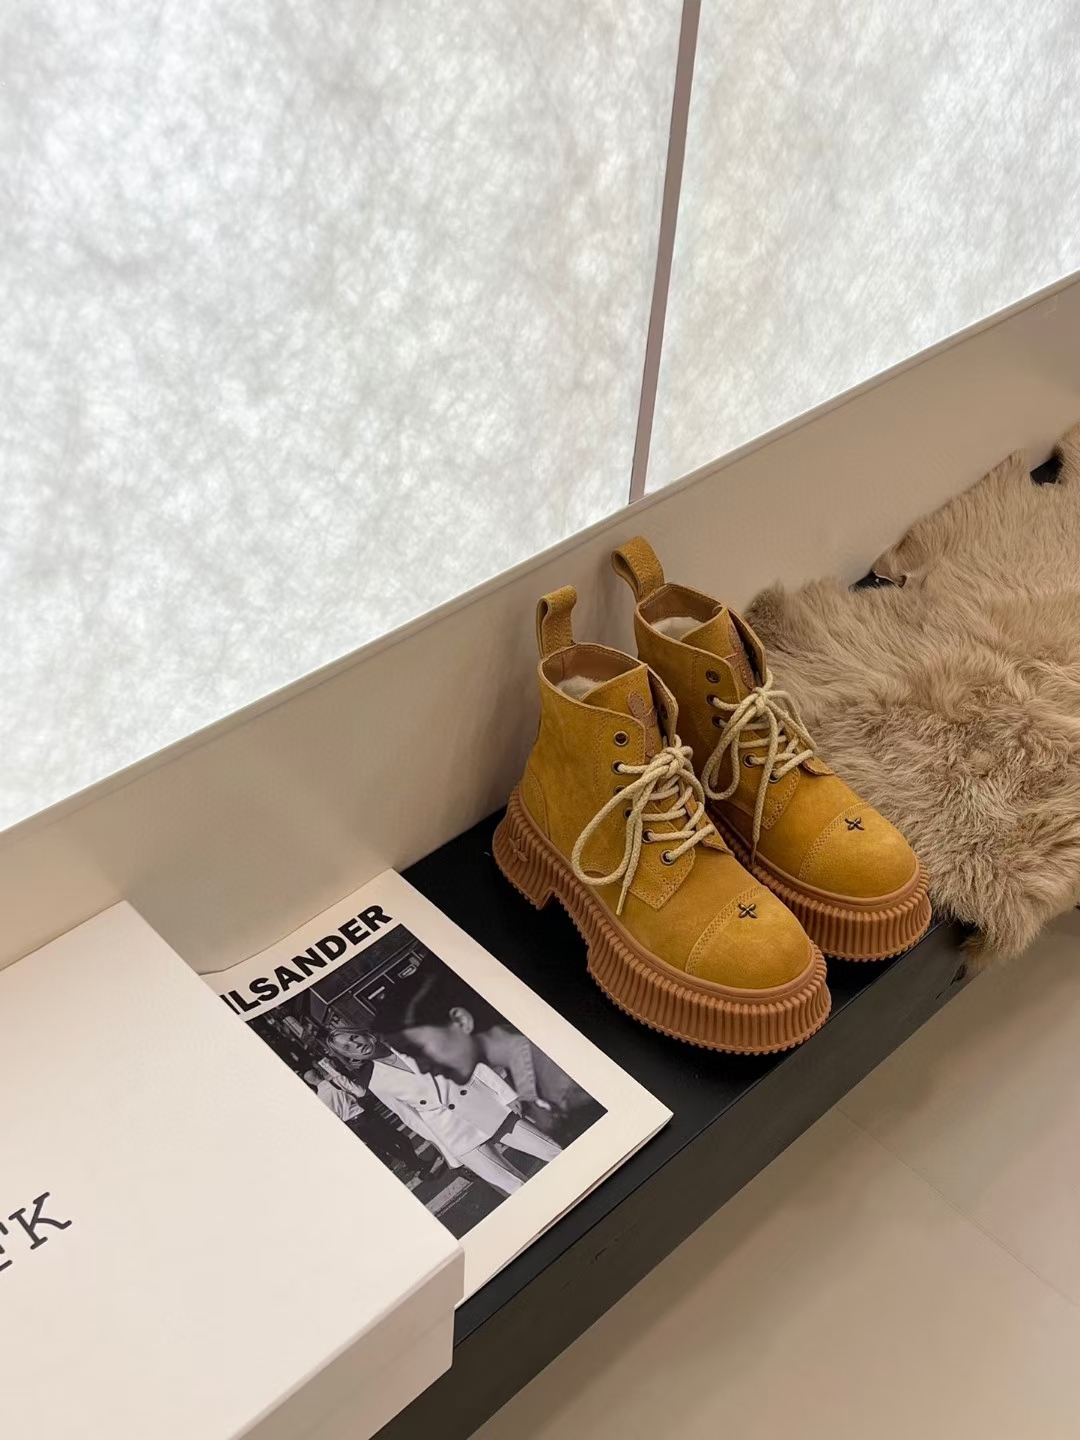 Smfk Store Martin Boots Black Grey Yellow Wool Fall Collection